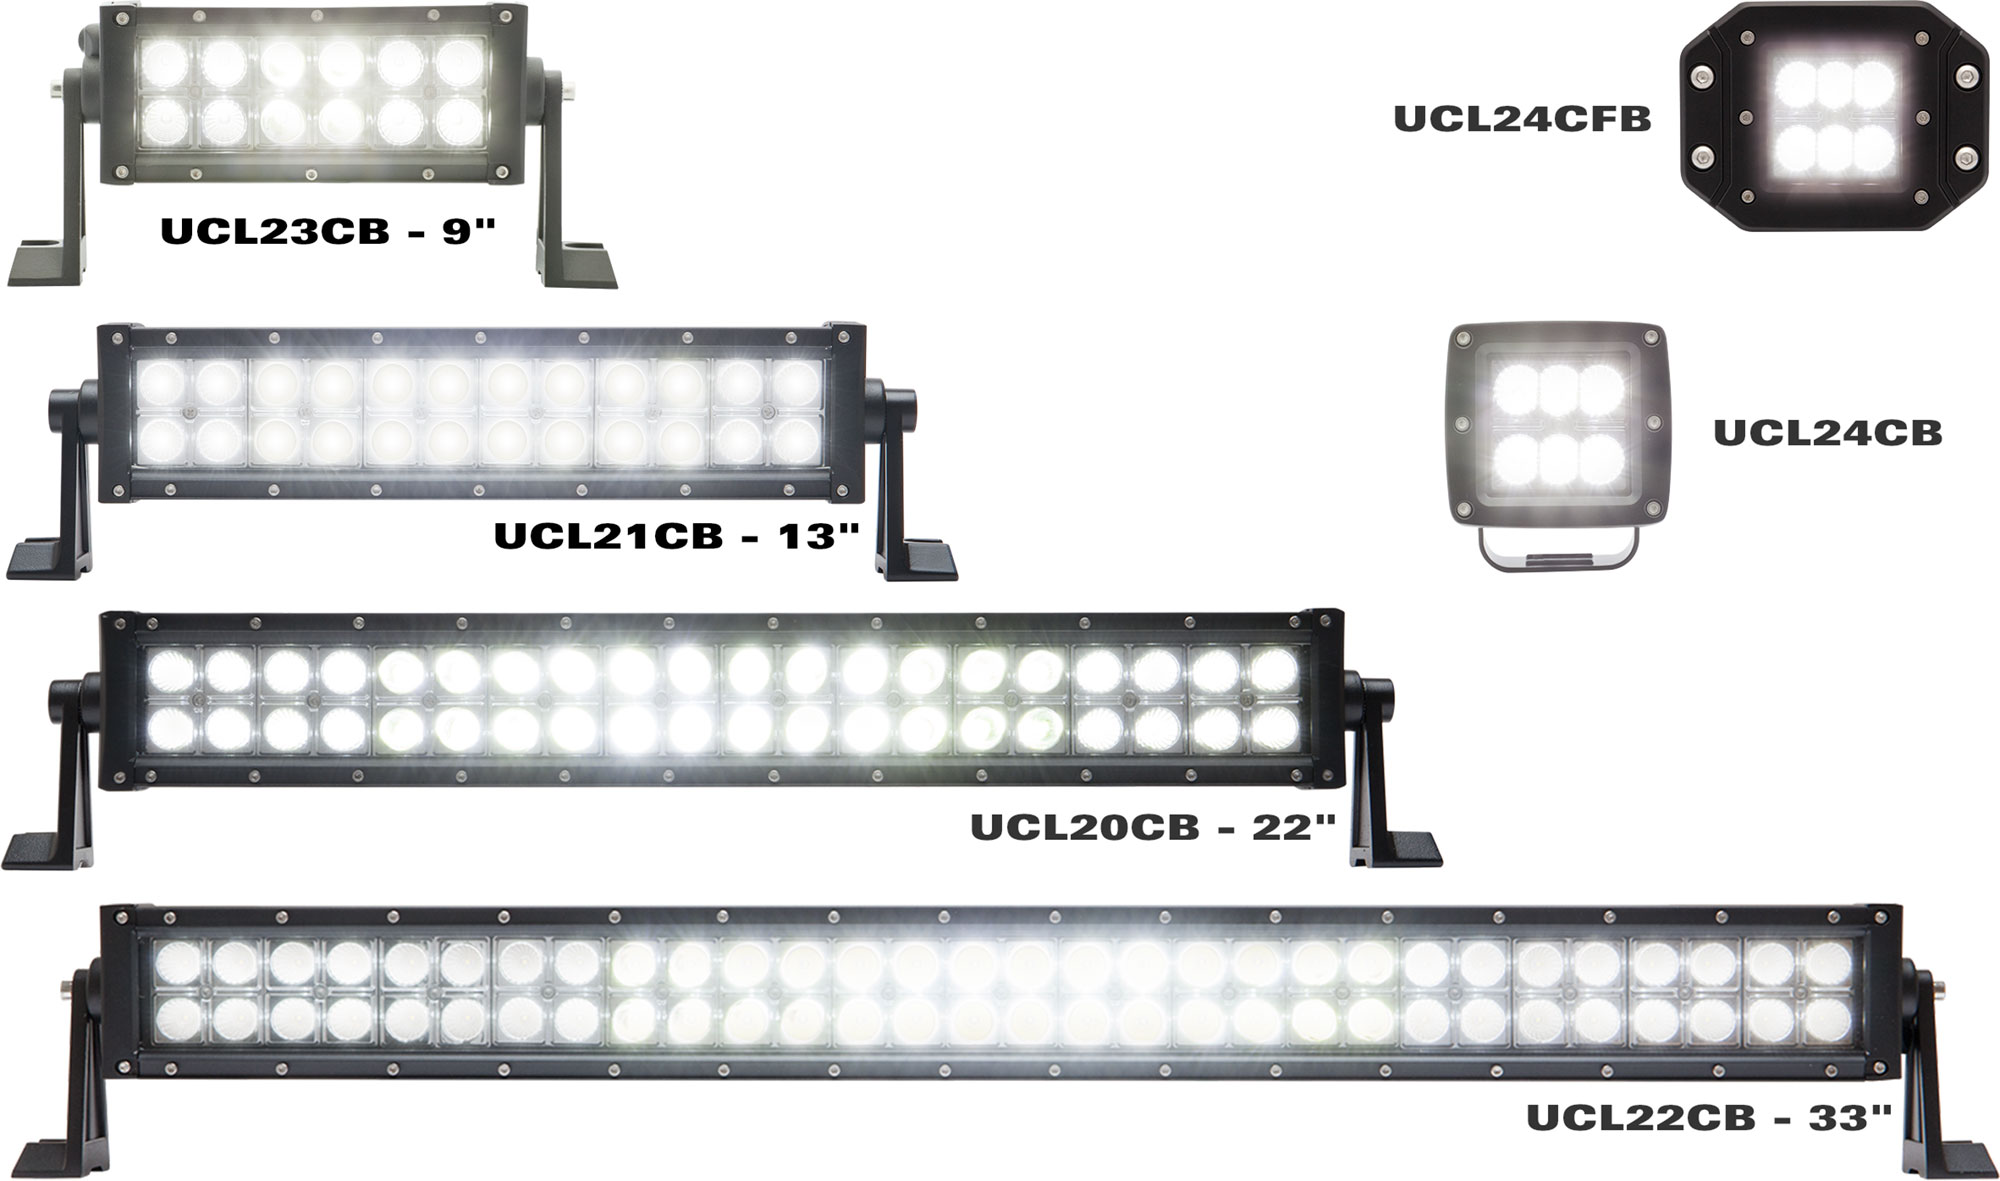 With a broad variety of sizes and outputs ranging from 1,800 to 20,000 lumens, there is sure to be an Optronics’ LED Light Bar that fits almost any space and need.